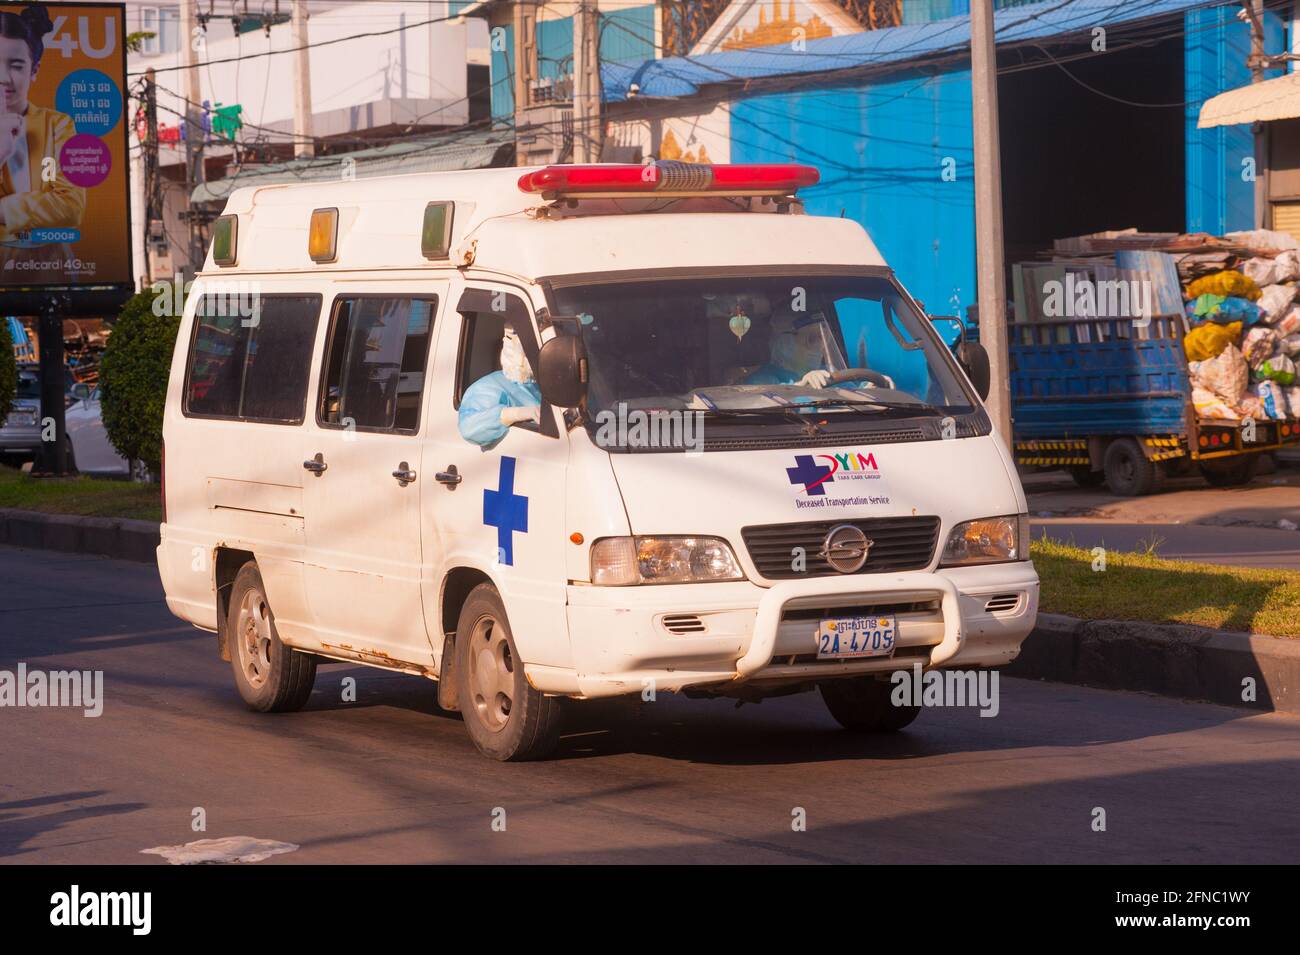 Phnom Penh, Cambodia. May 16th, 2021. after 4 weeks of the city being in total lockdown, the government continues to divide Phnom Penh into 3 color zones (red, orange & yellow) due to the ongoing COVID - 19 surge. an antiquated ambulance, with both EMTs in full PPE, speeds down the street in a 'Red Zone', meaning high risk of infection. Credit: Kraig Lieb / Alamy Live News Stock Photo